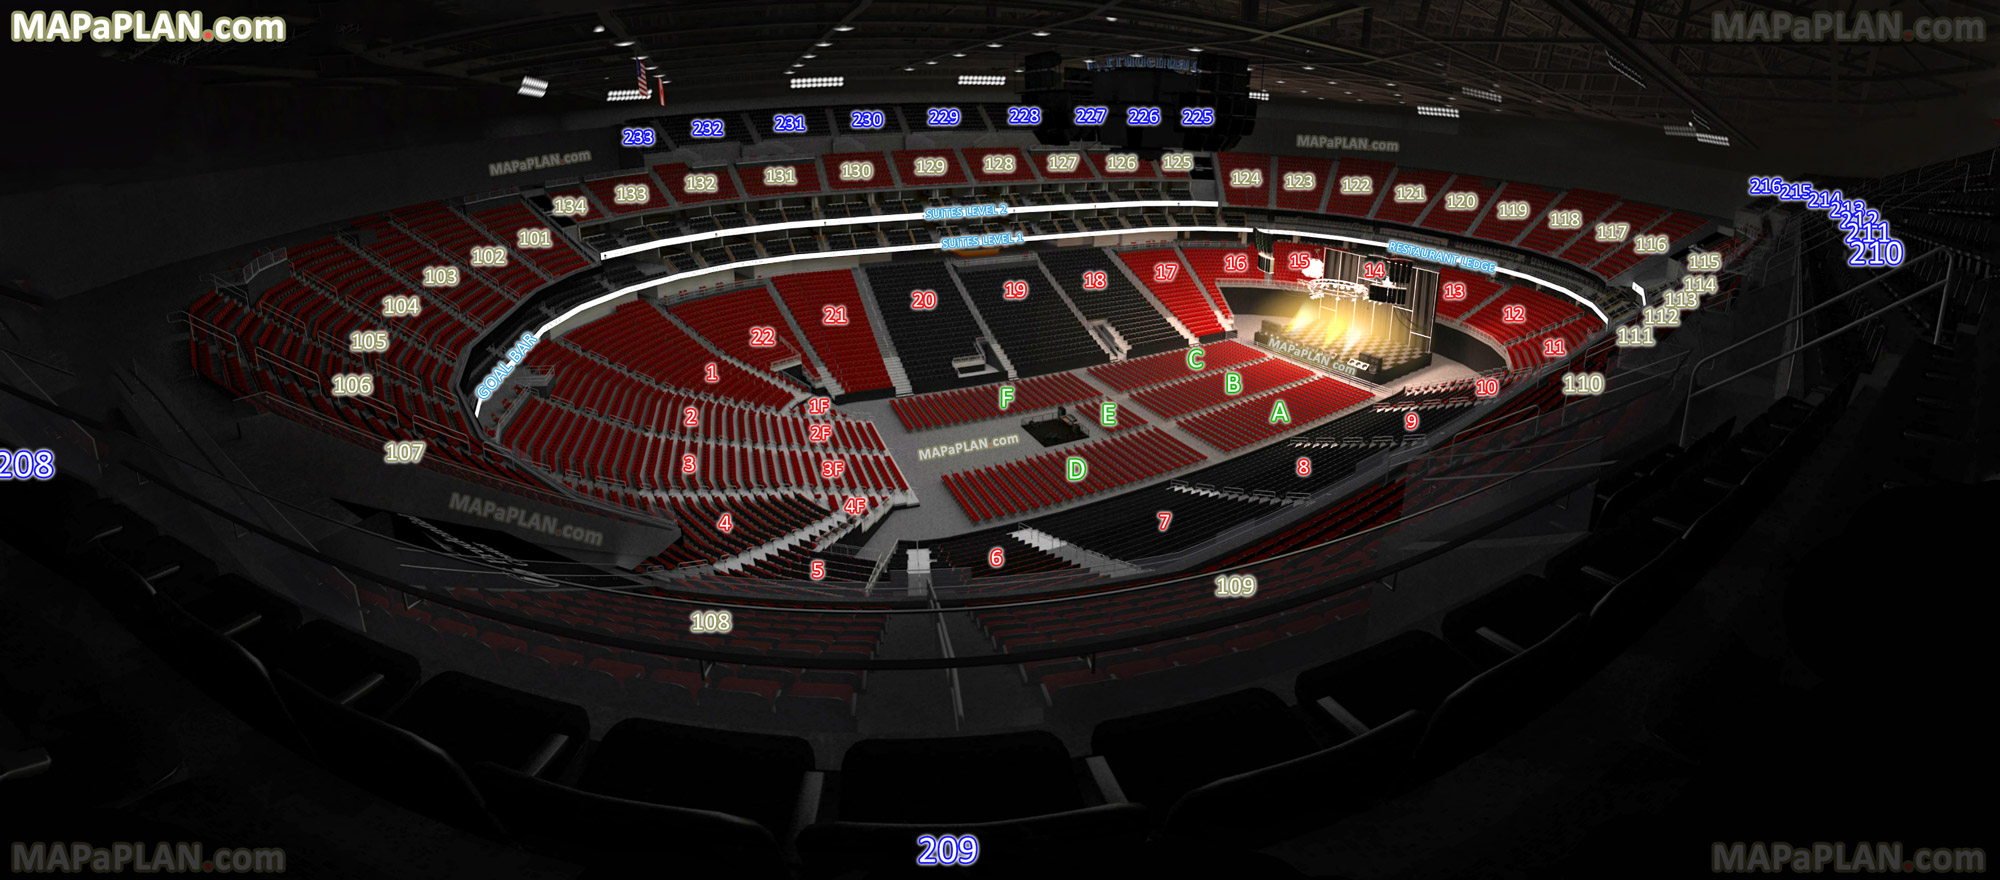 view from section 209 row 3 seat 10 good bad seats review guide information Newark Prudential Center seating chart